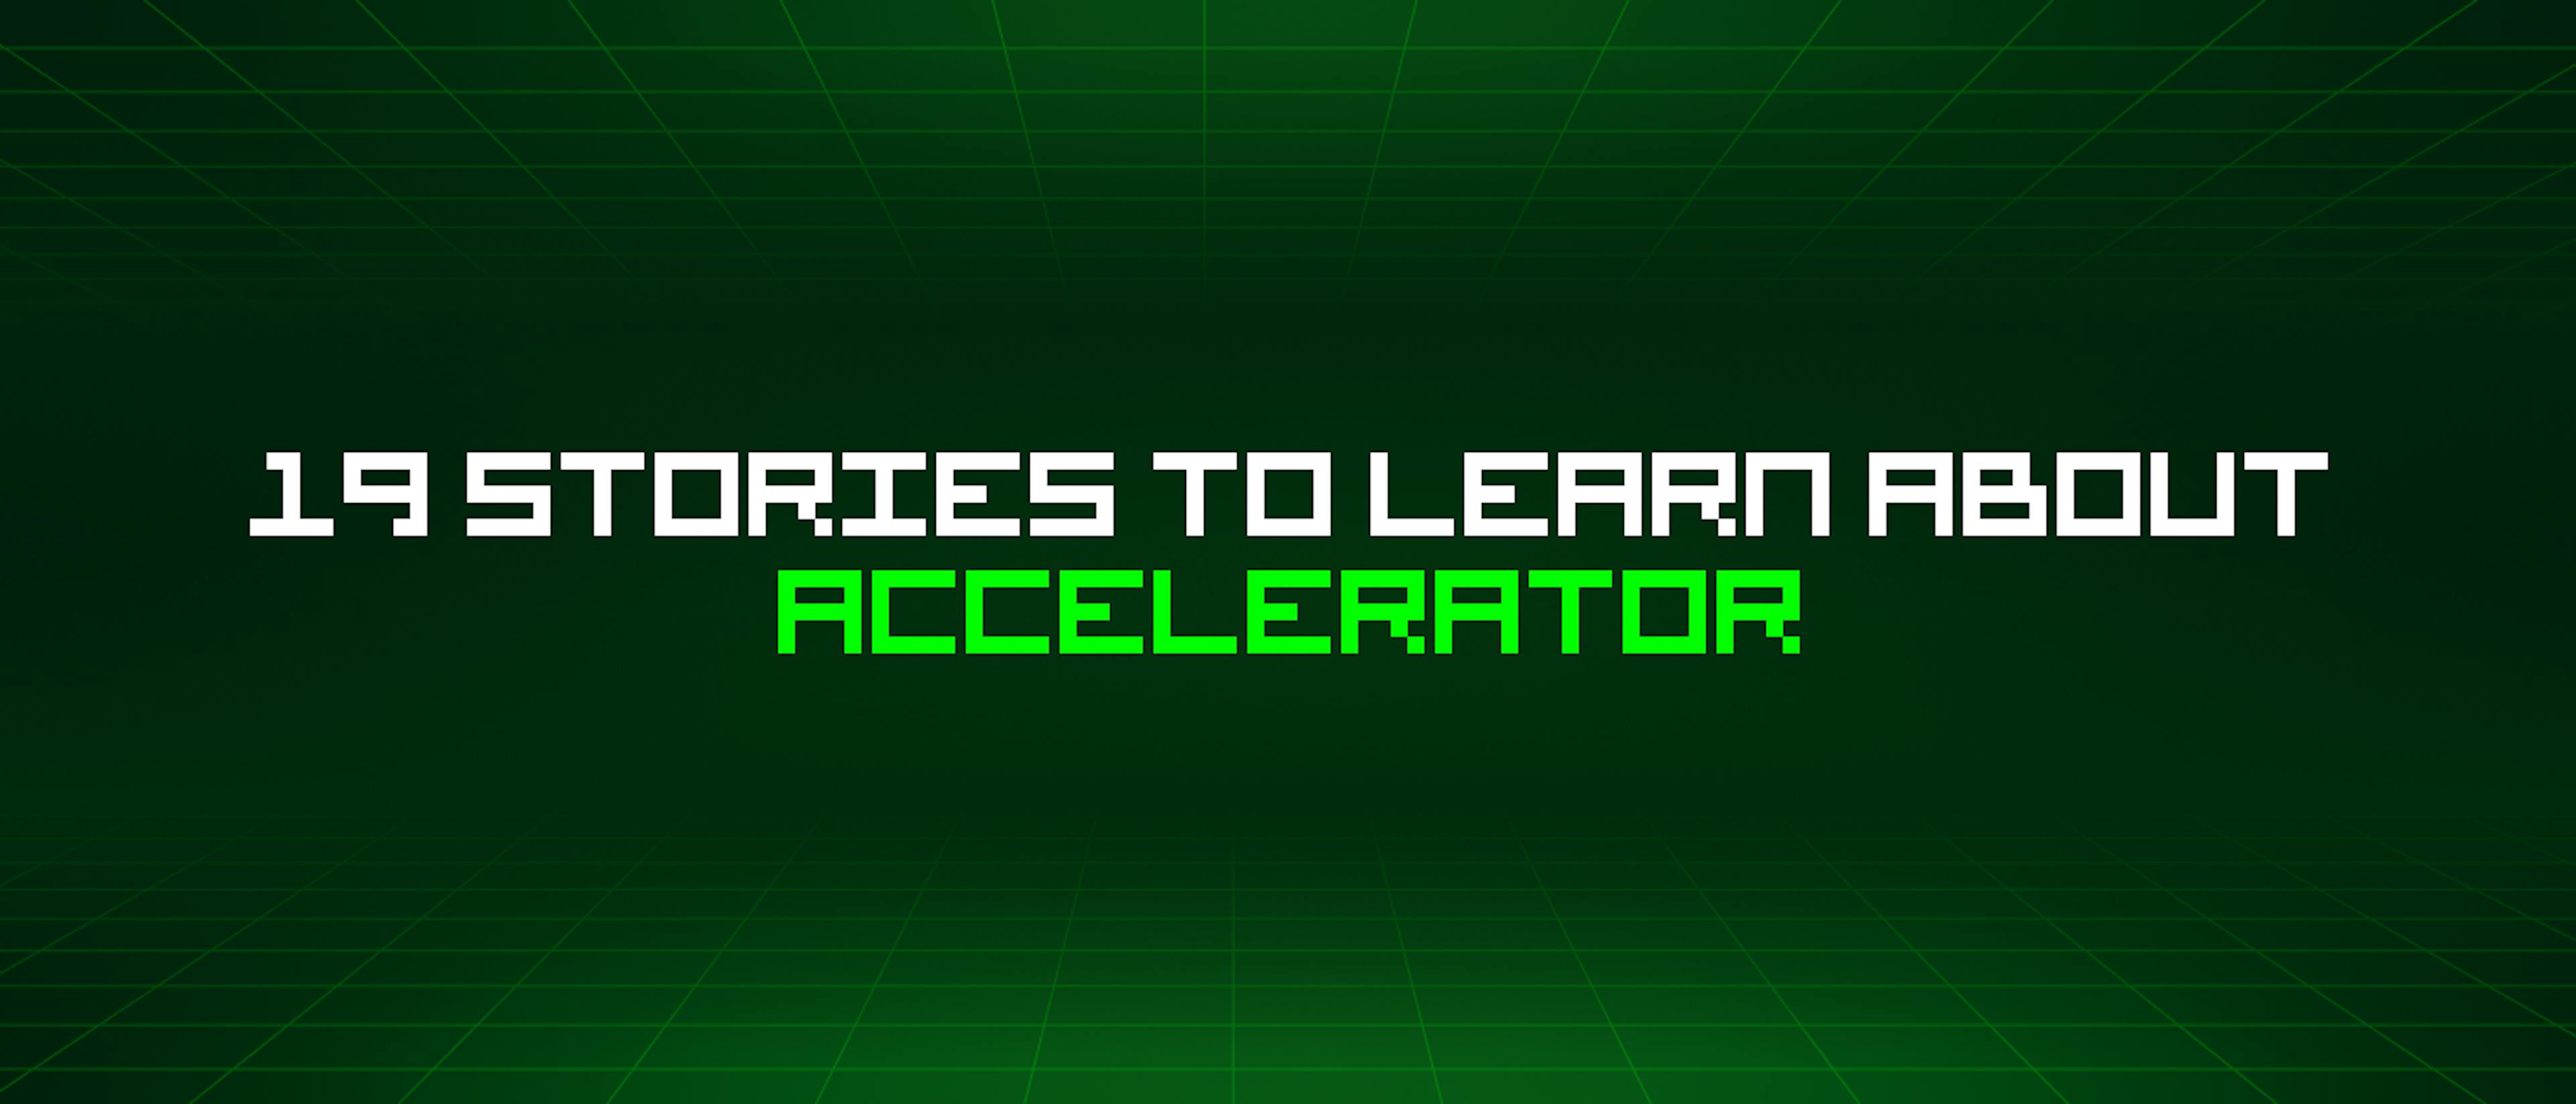 featured image - 19 Stories To Learn About Accelerator